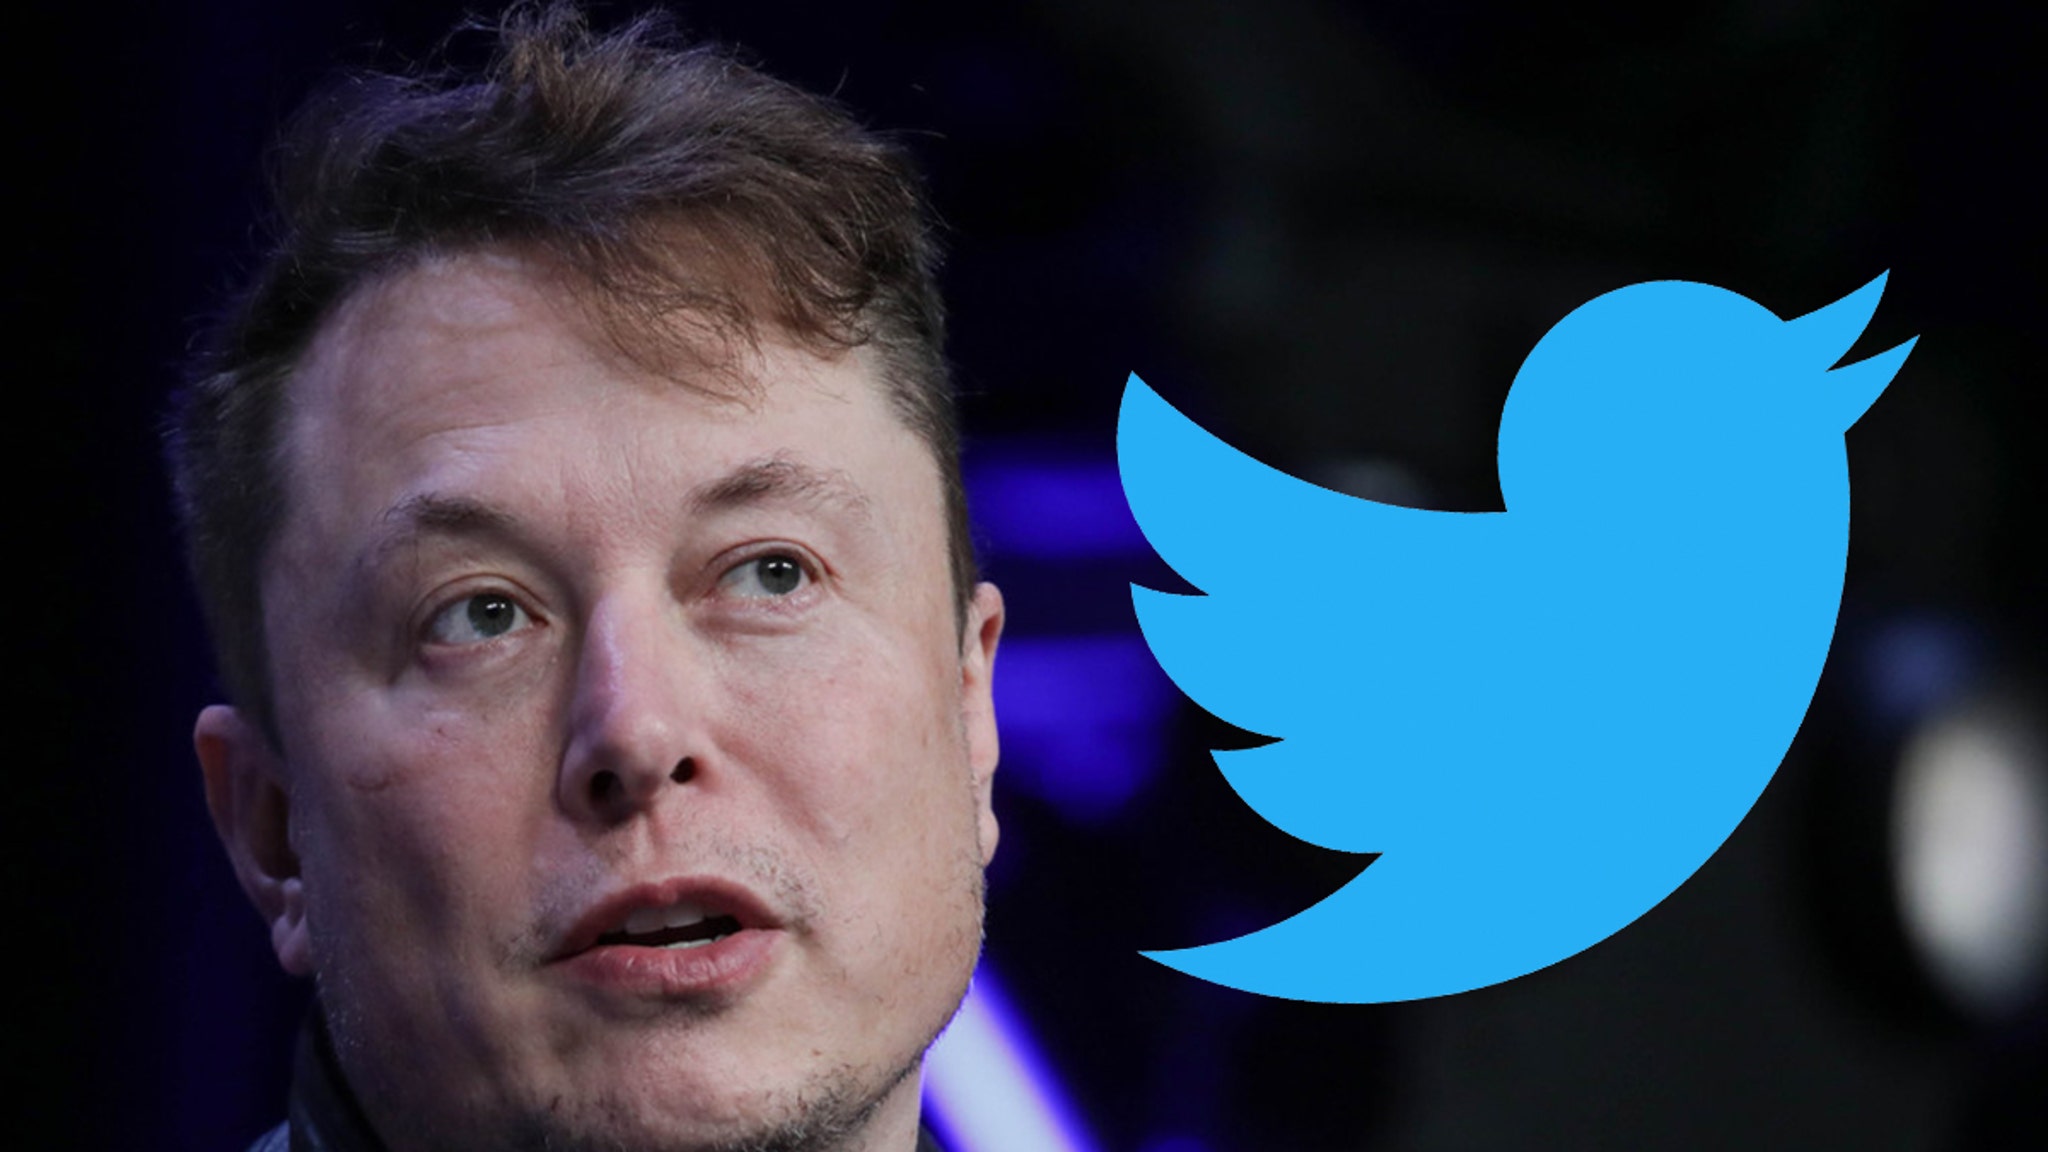 Elon Musk To Terminate His Deal With Twitter